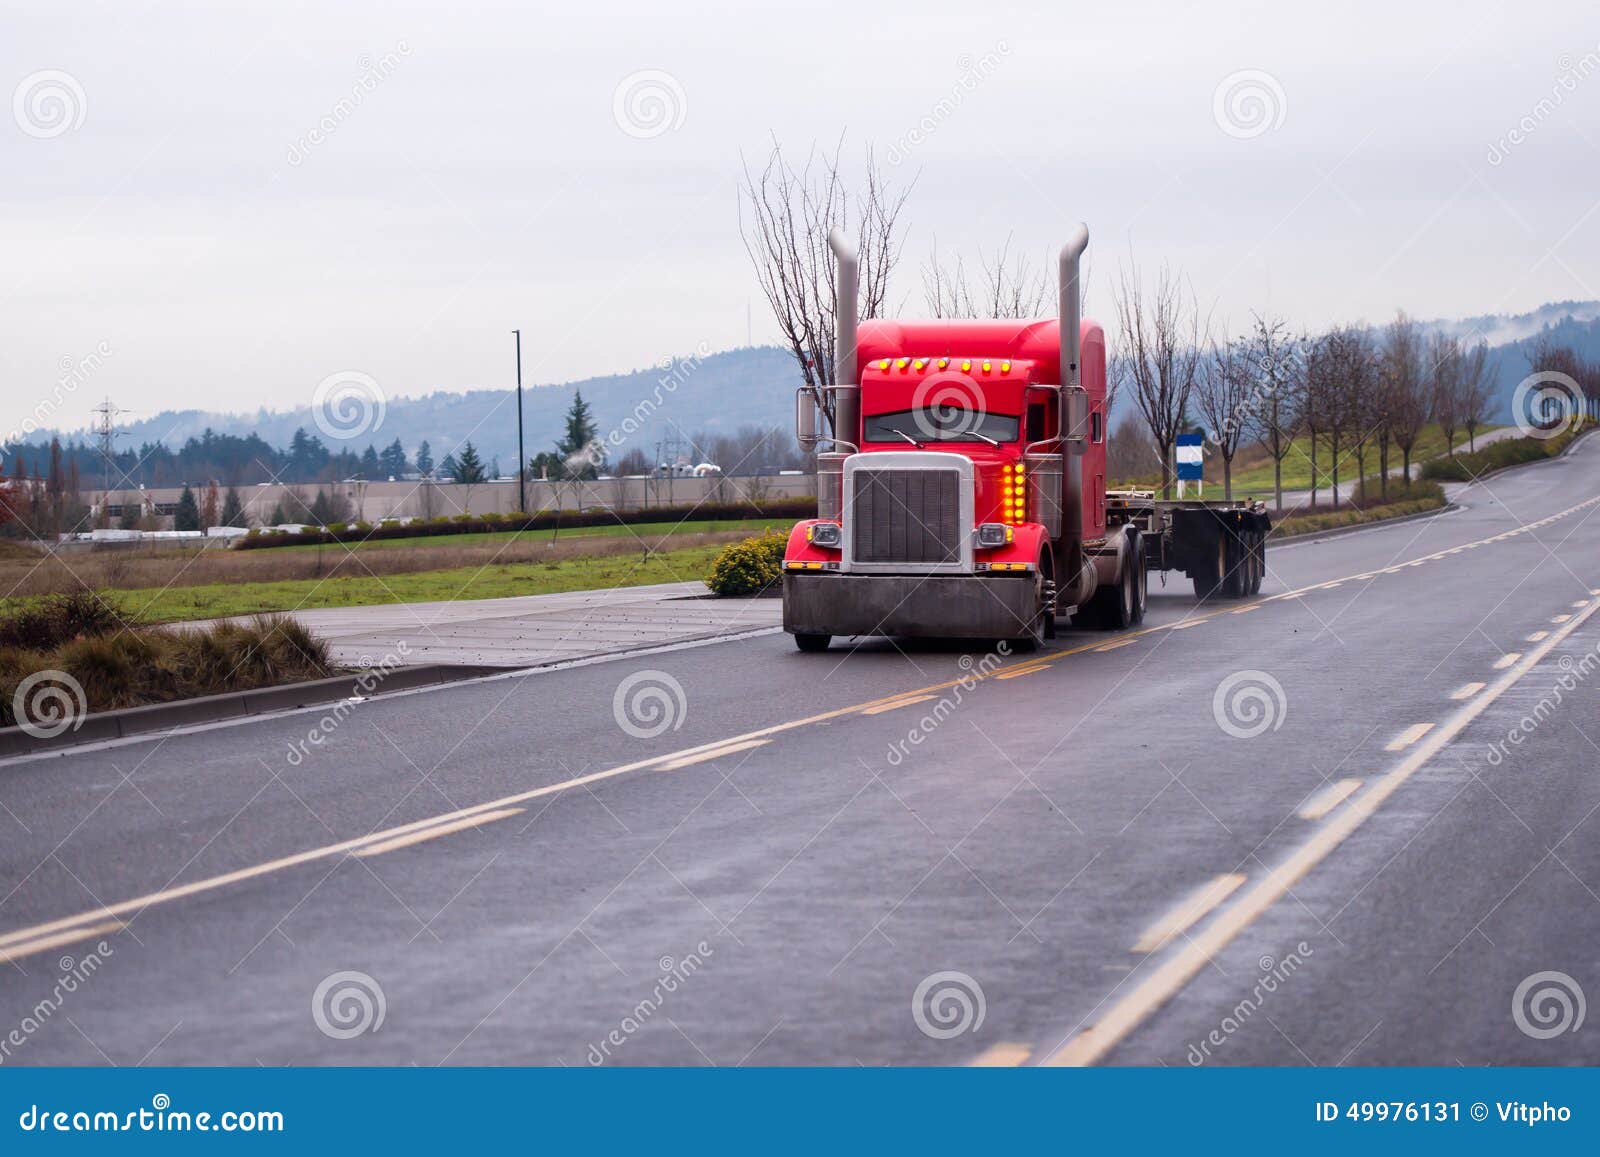 powerful stylish classic semi truck with vertical exhaust pipes stock image image of classic duty 49976131